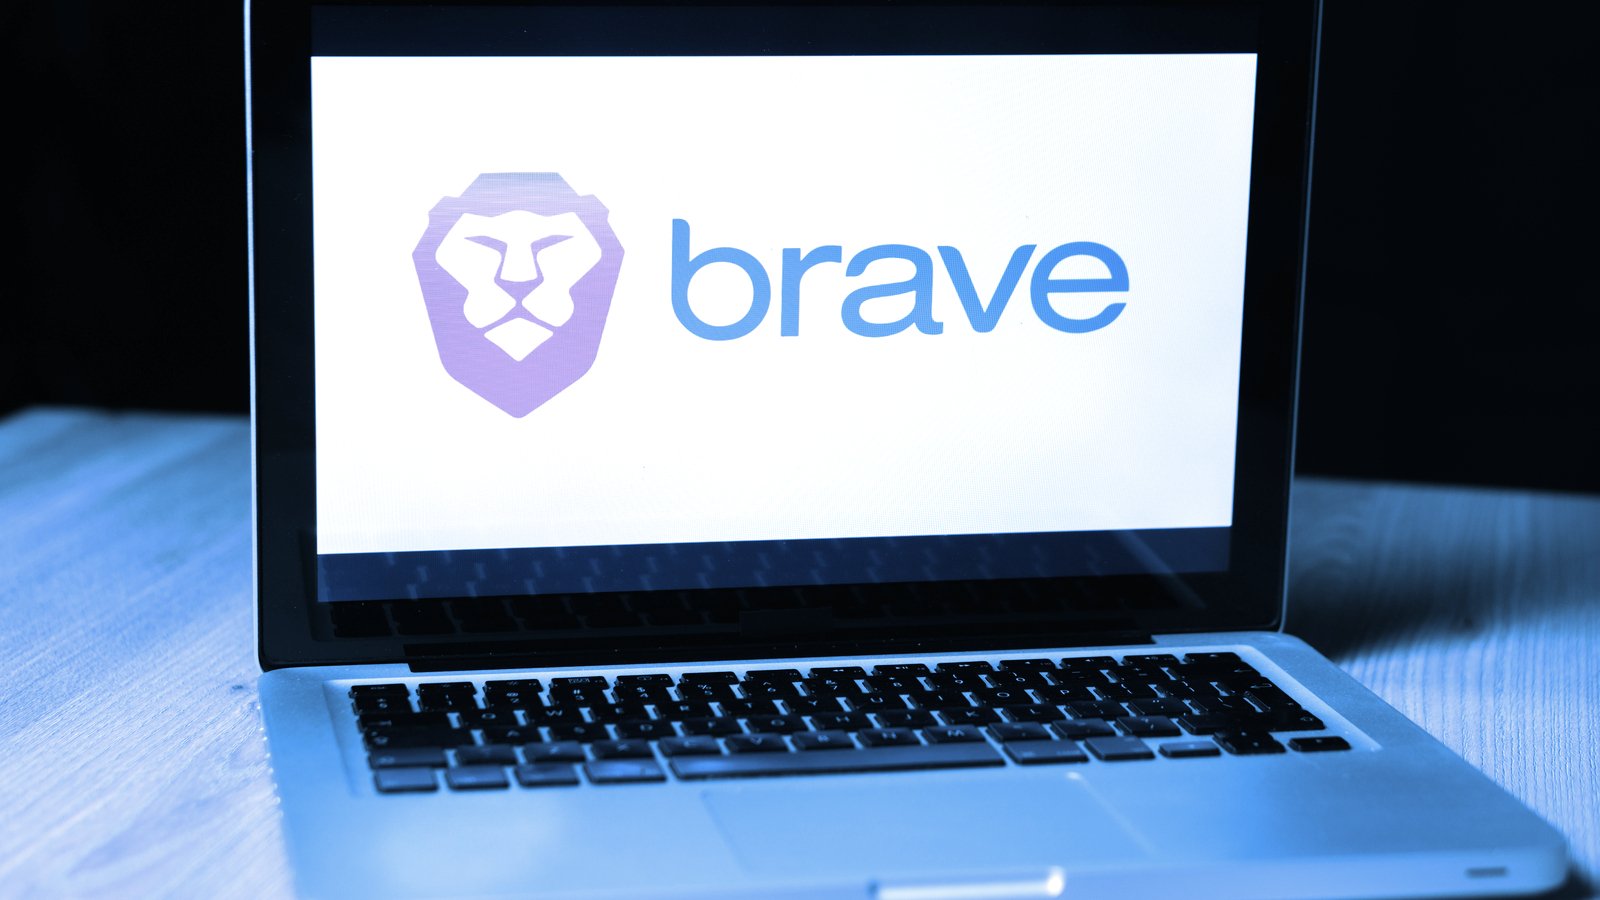 Brave's privacy-focused search engine is here to challenge Google